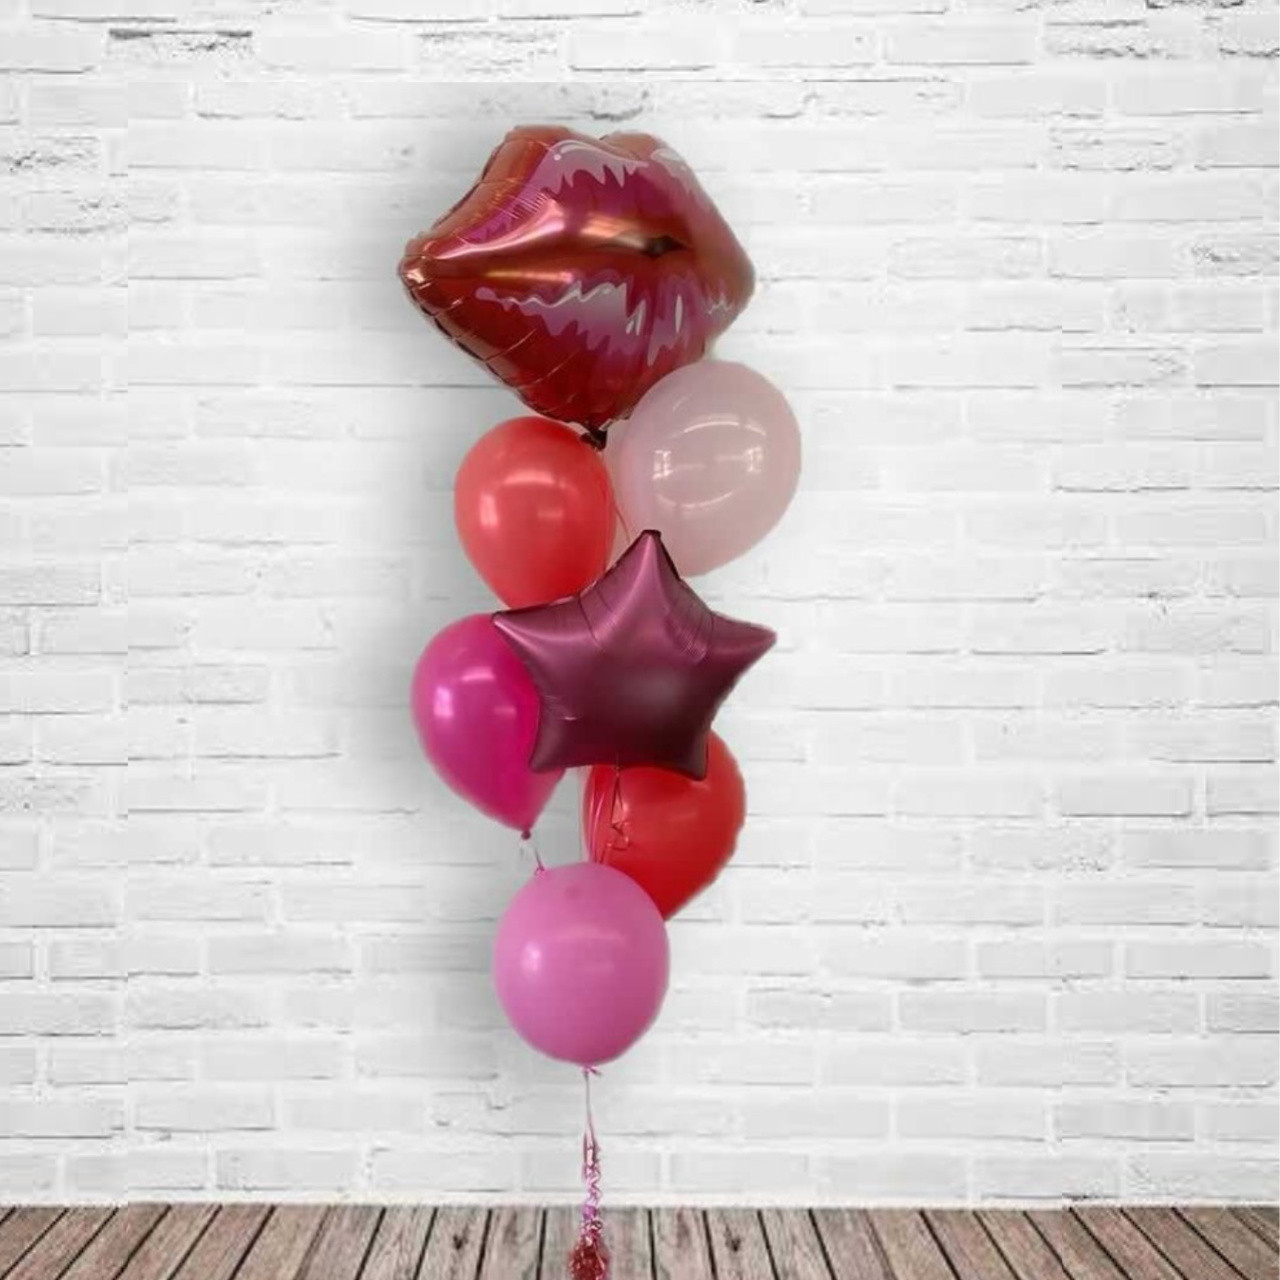 LIPS BOUQUET VALENTINE HENS SHOWER PARTY BALLOONS